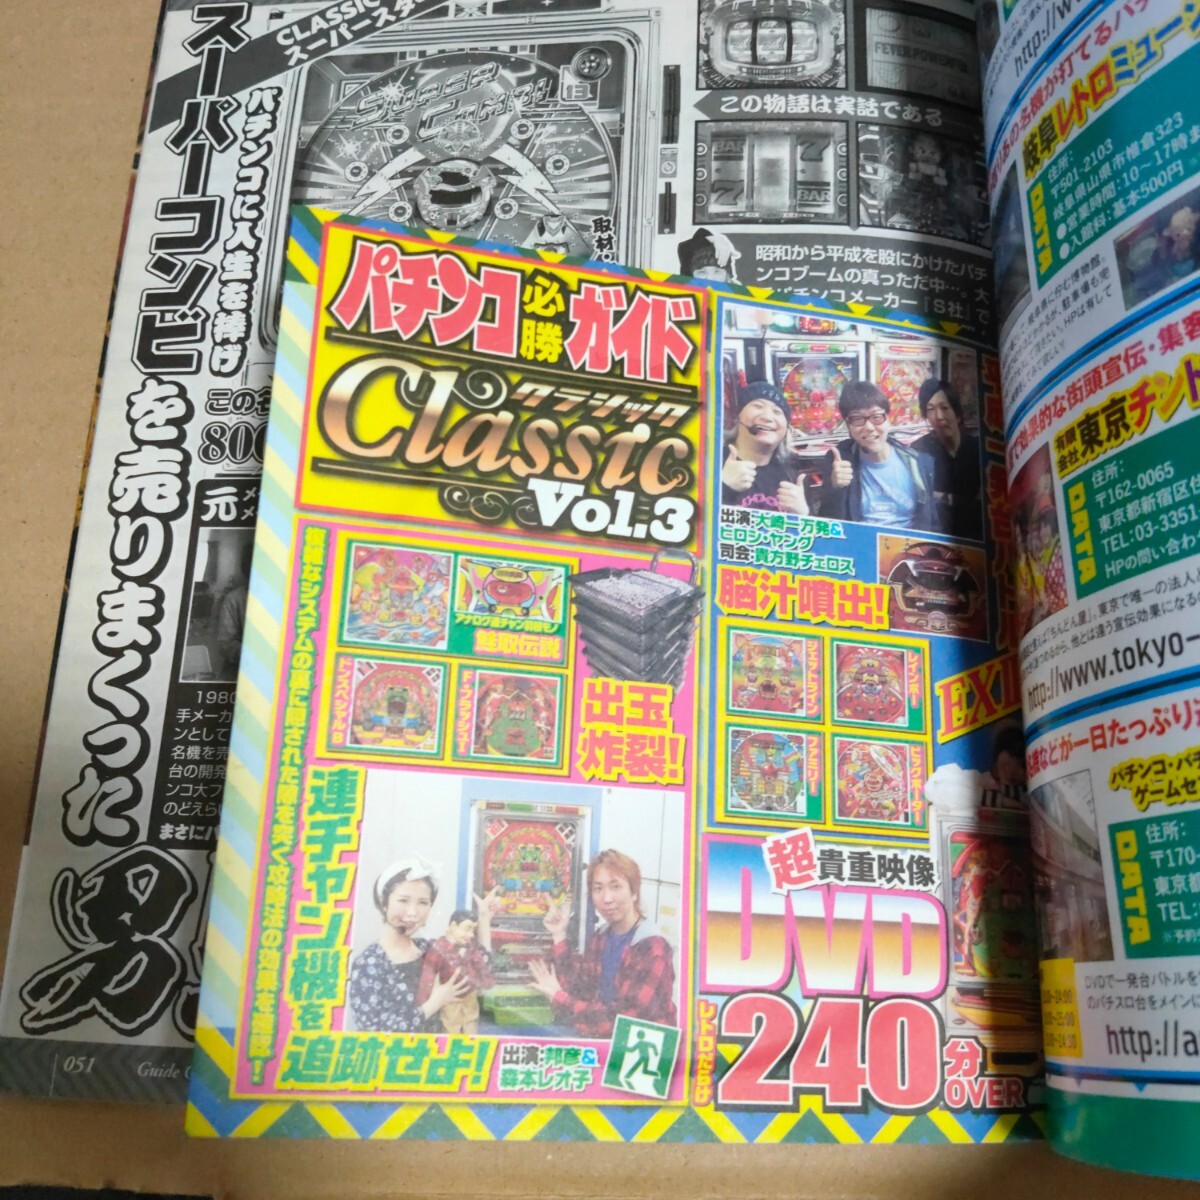  pachinko certainly . guide classic Classic vol.3